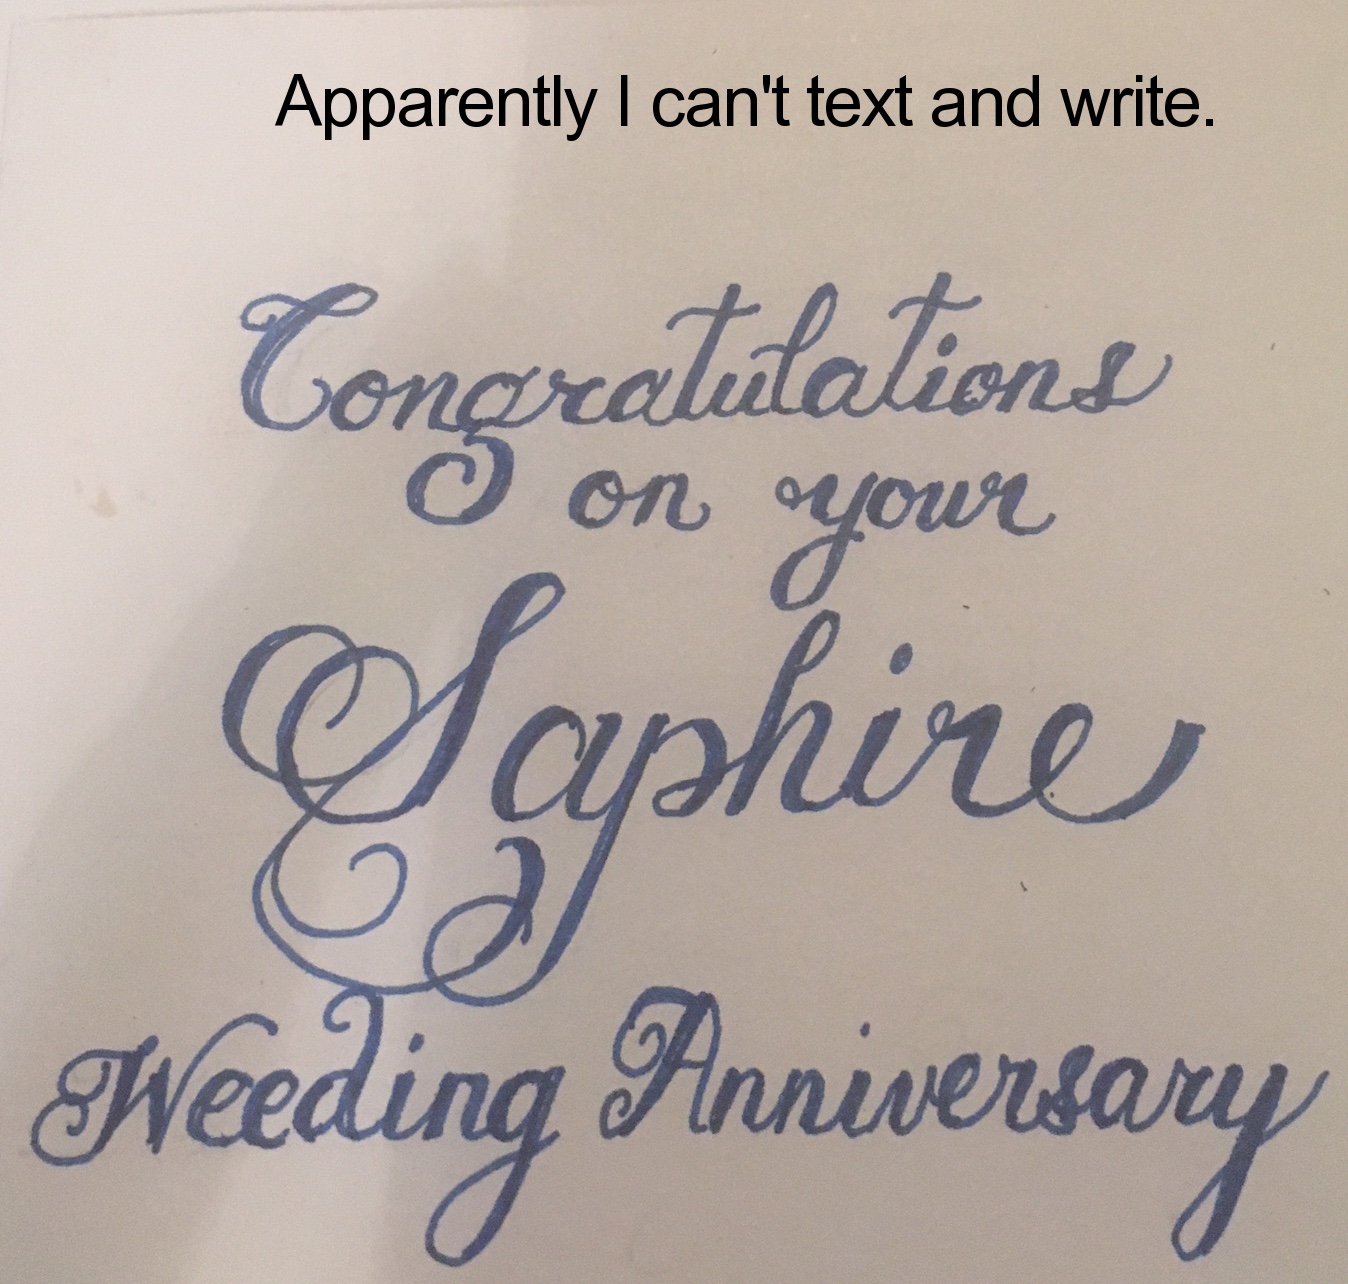 handwriting - Apparently I can't text and write. o on your Congratulations Saphire Weeding Anniversary